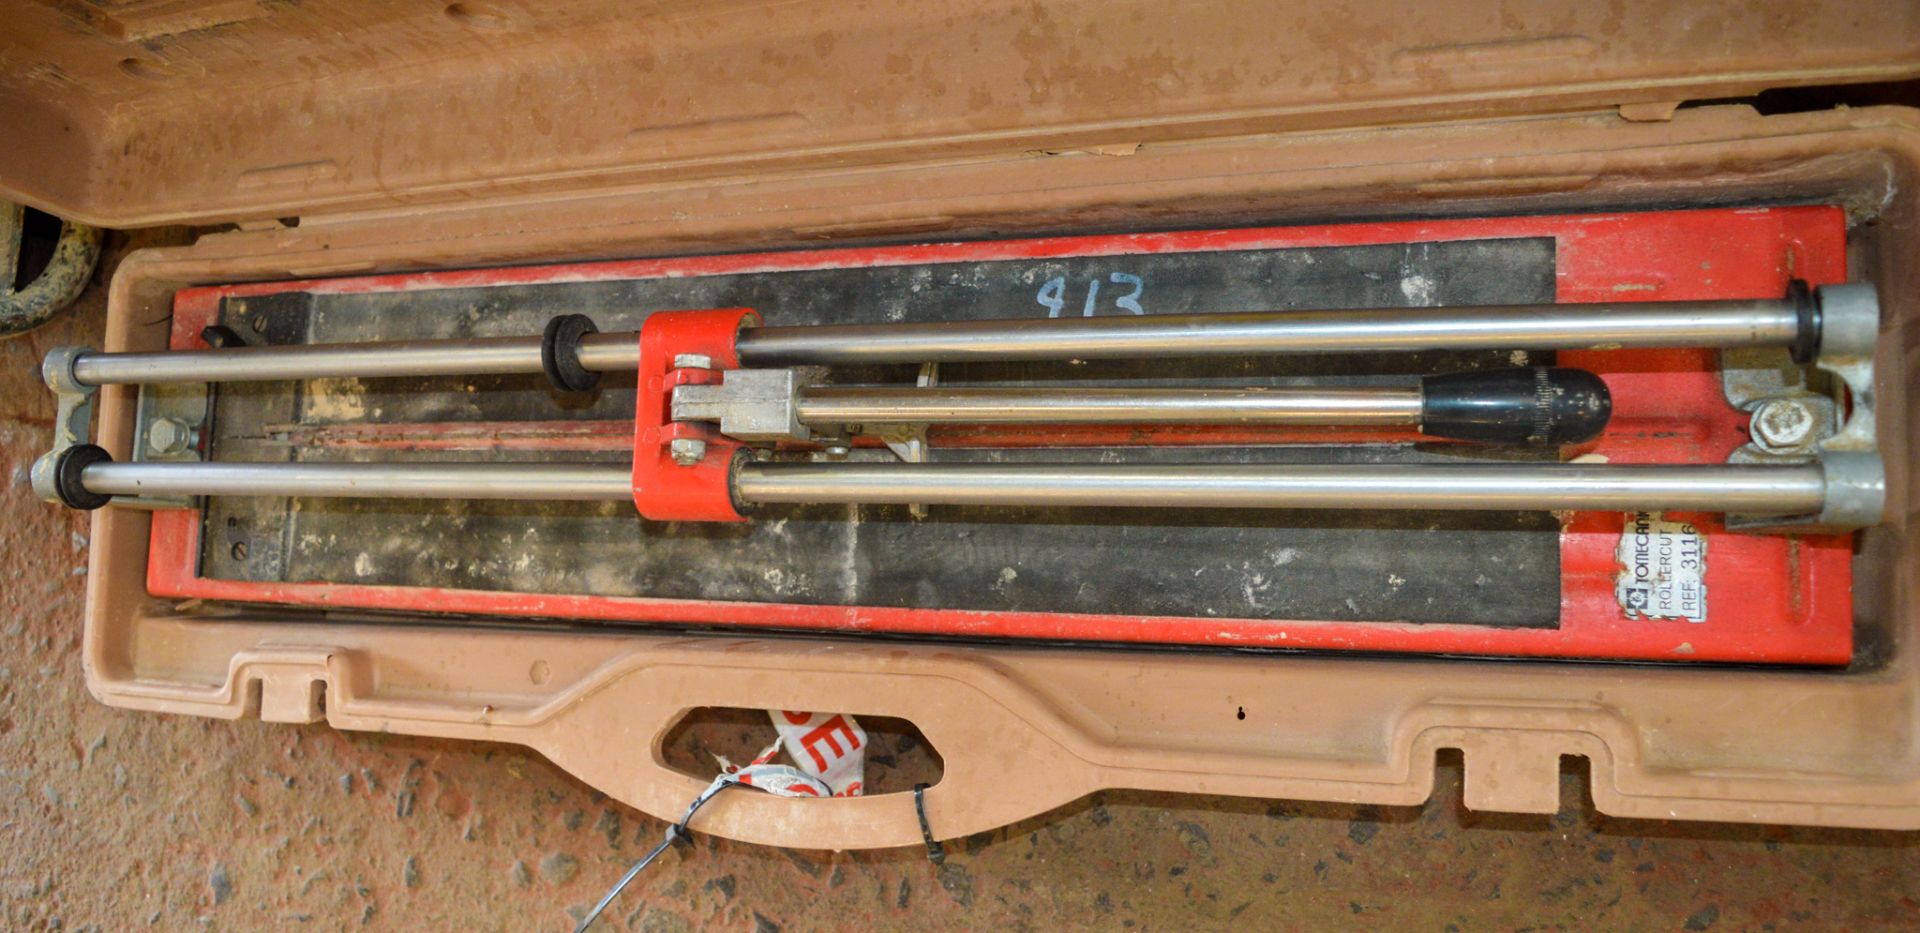 Tomecanic 600mm tile cutter c/w carry case 02730085